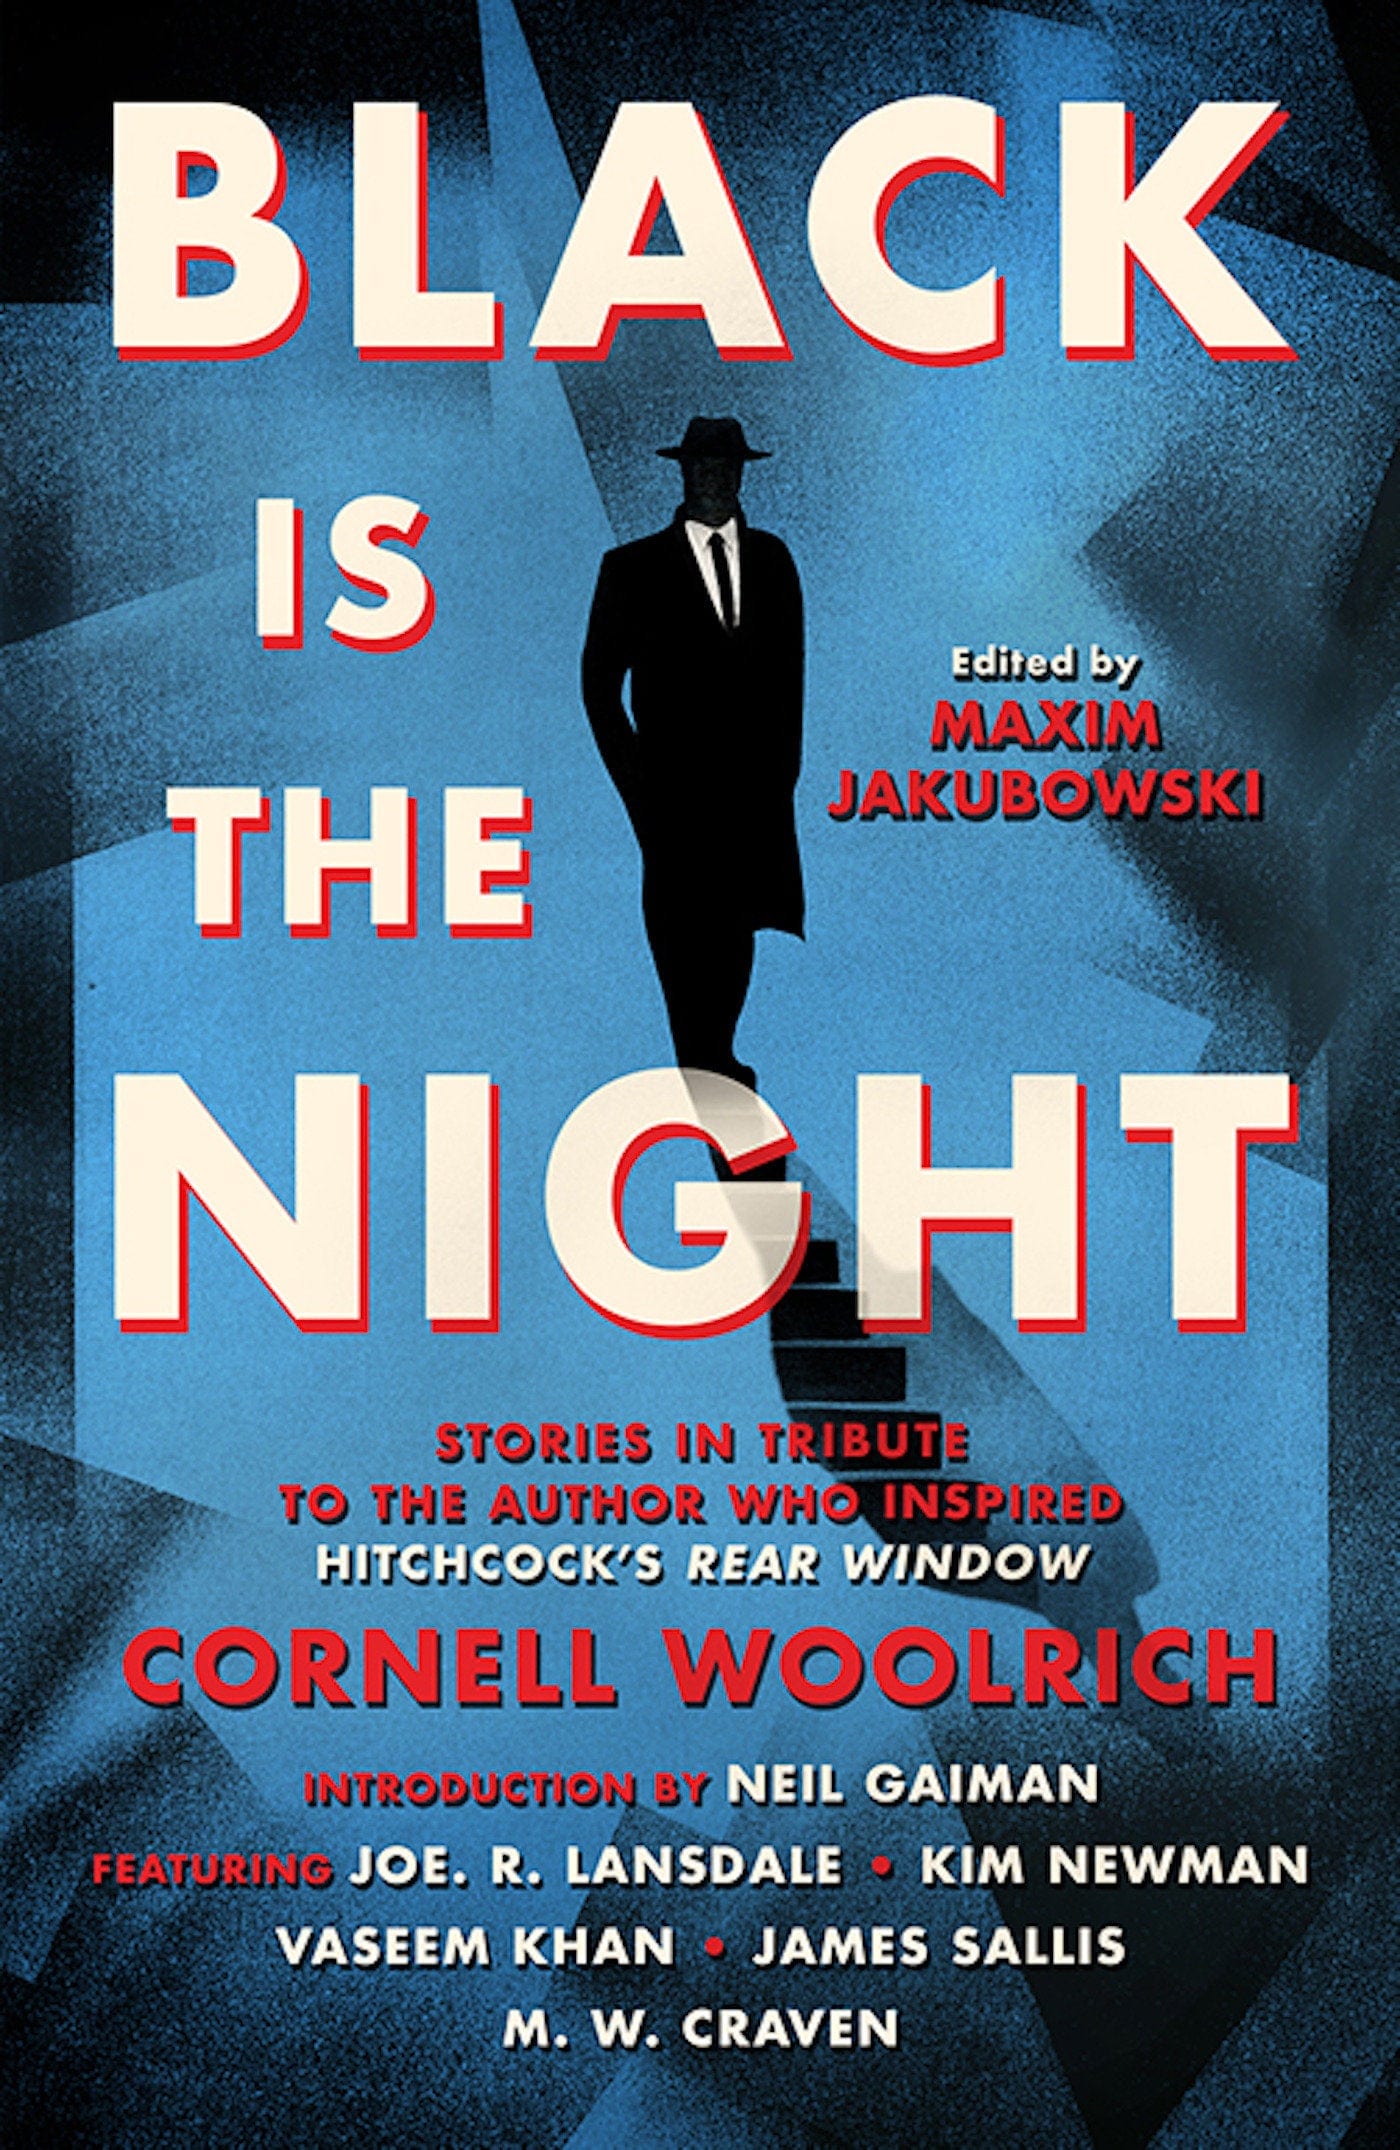 Black Is The Night: Stories inspired by Cornell Woolrich - Third Eye